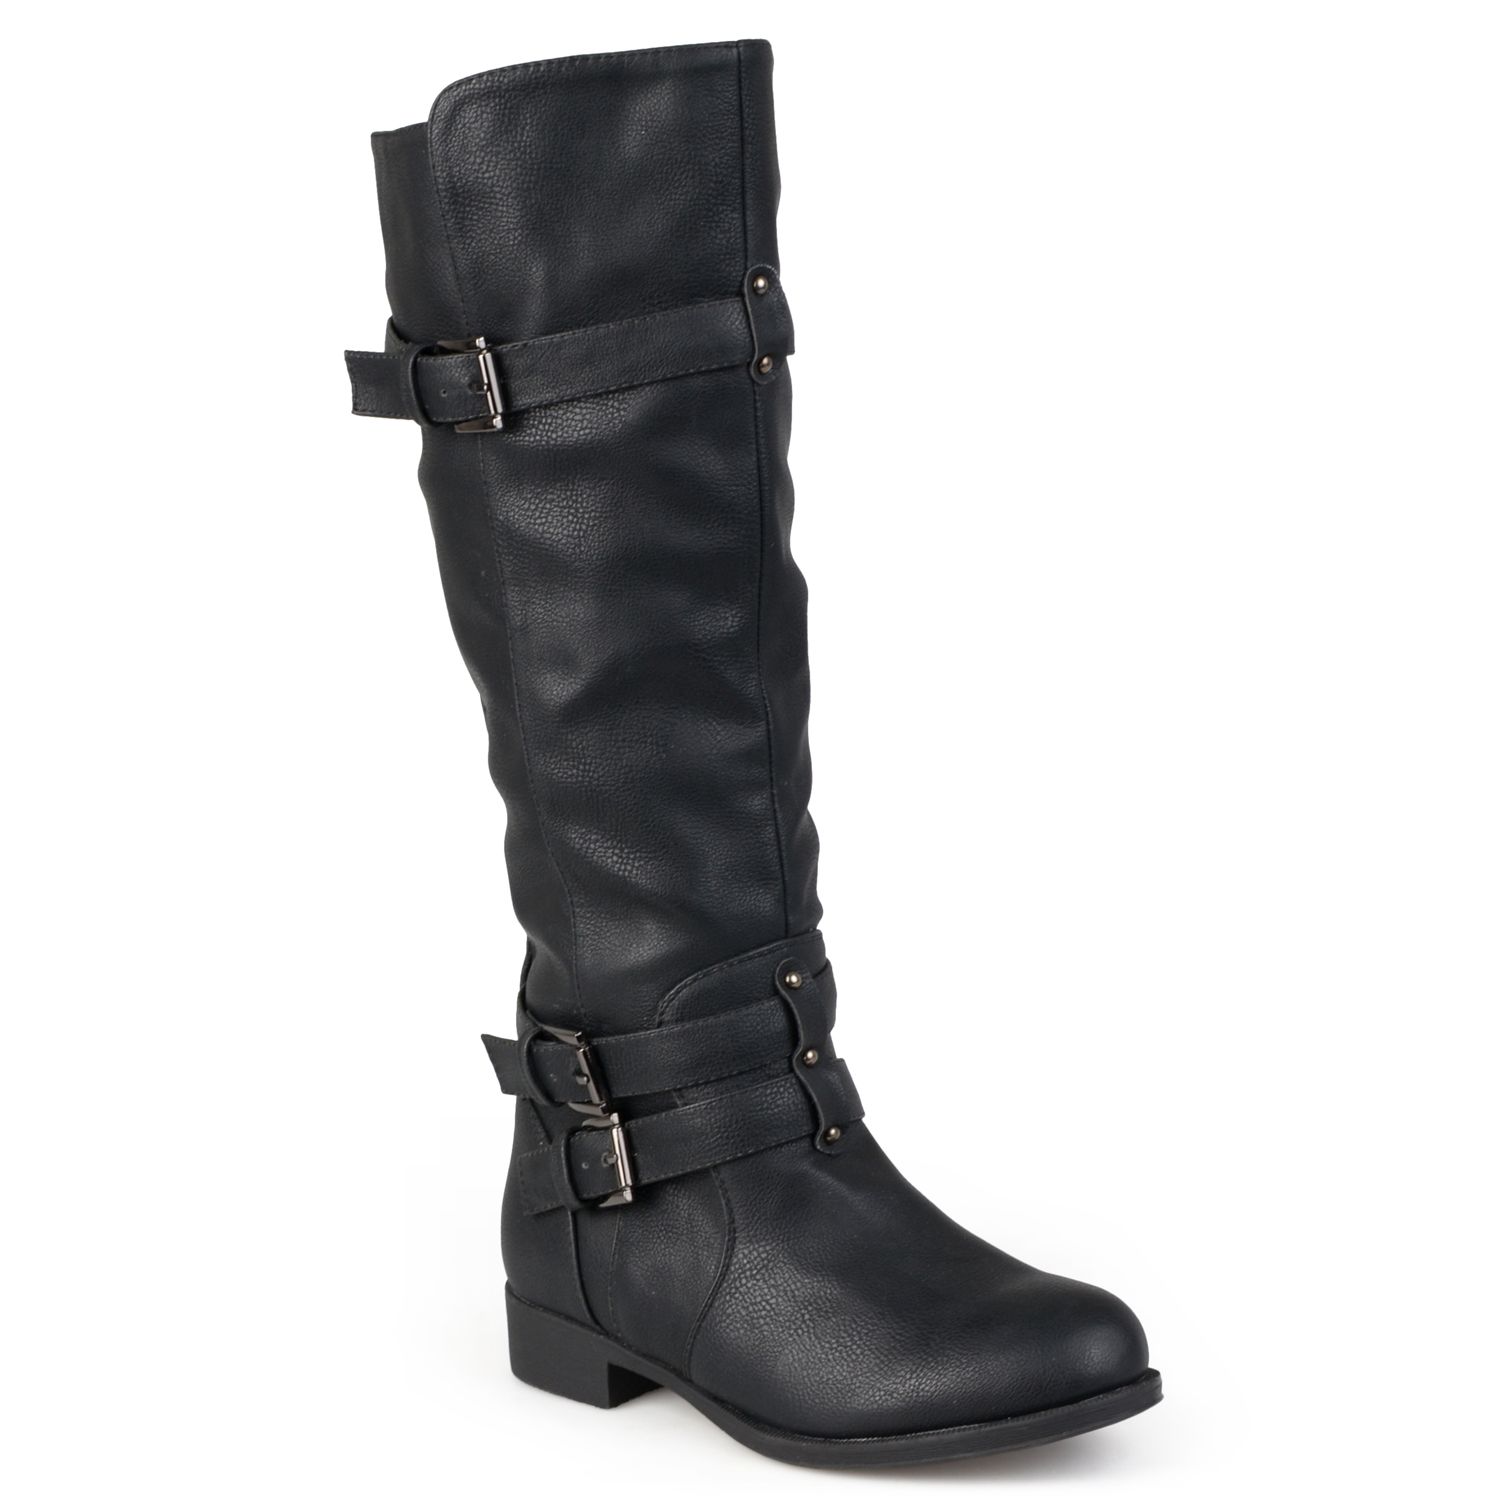 Image for Henry Ferrera Journee Collection Bite Women's Tall Boots at Kohl's.